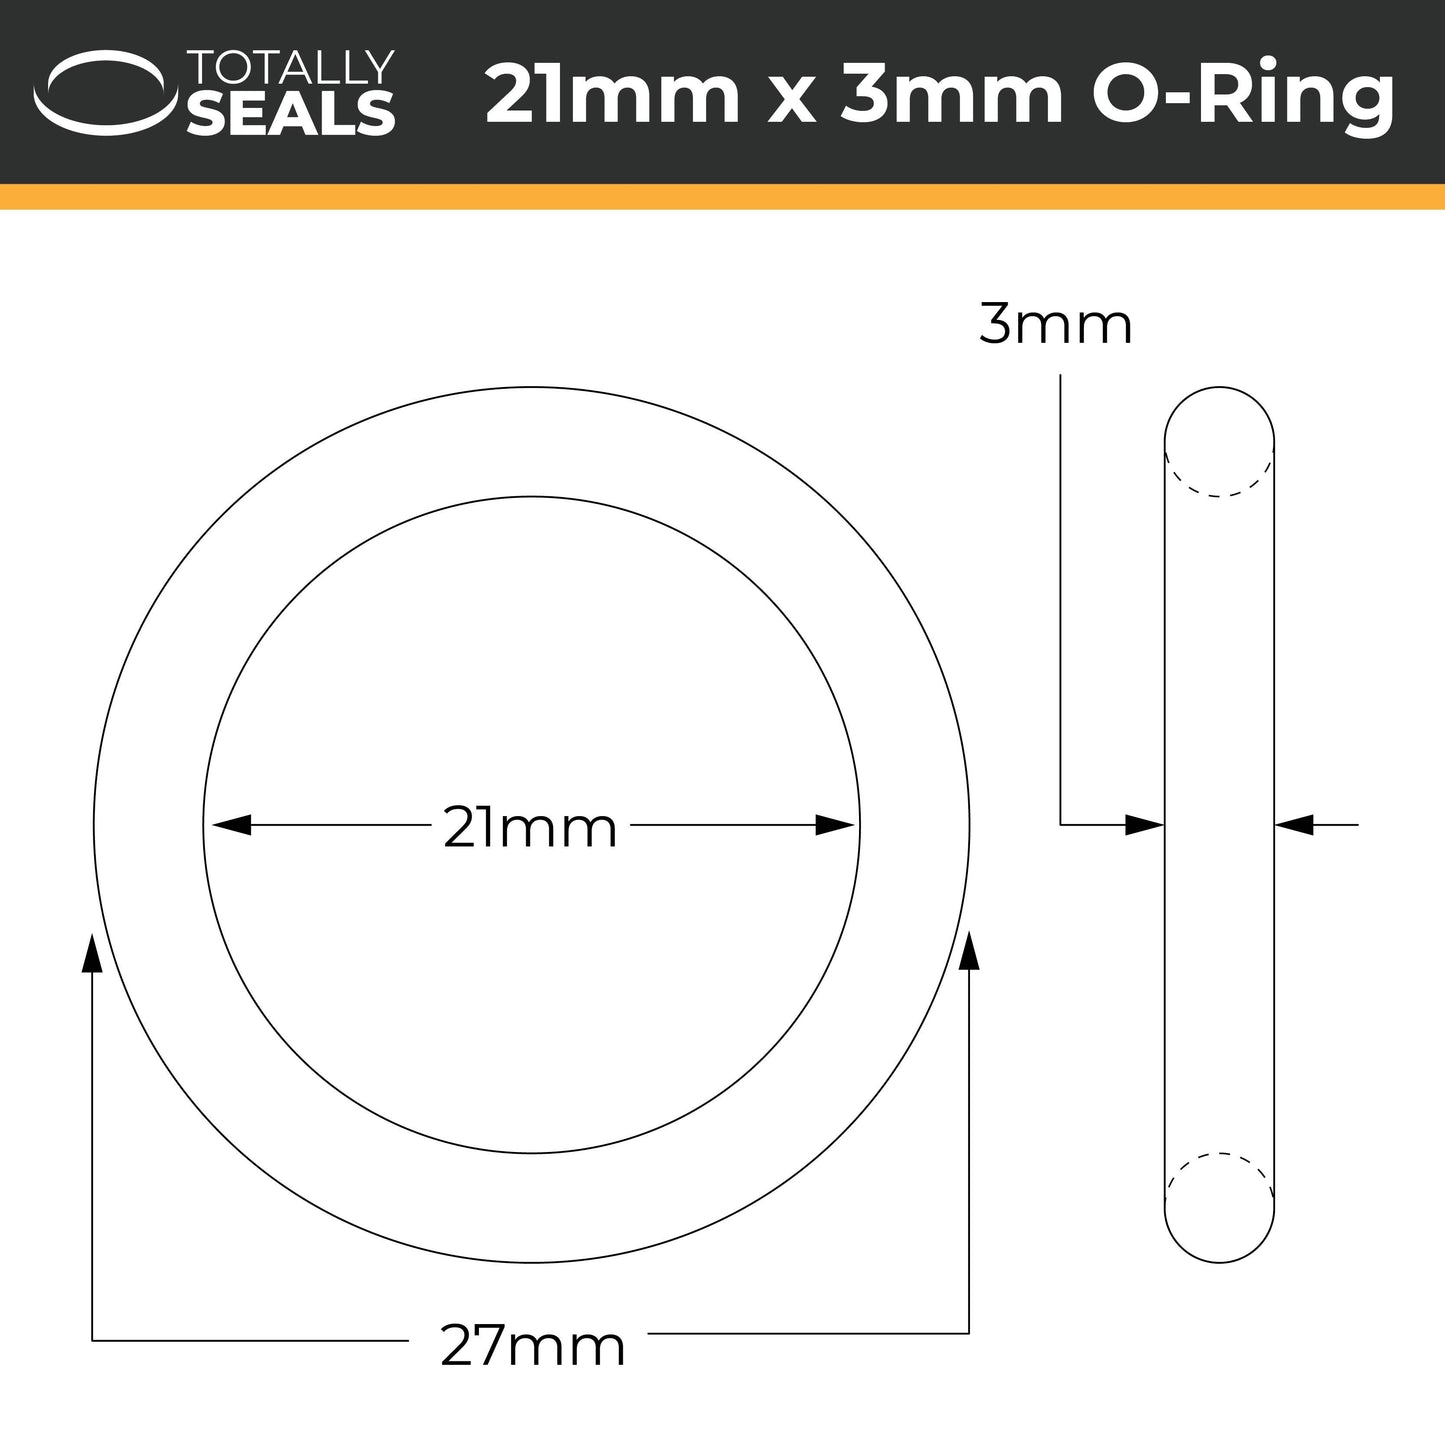 21mm x 3mm (27mm OD) Nitrile O-Rings - Totally Seals®